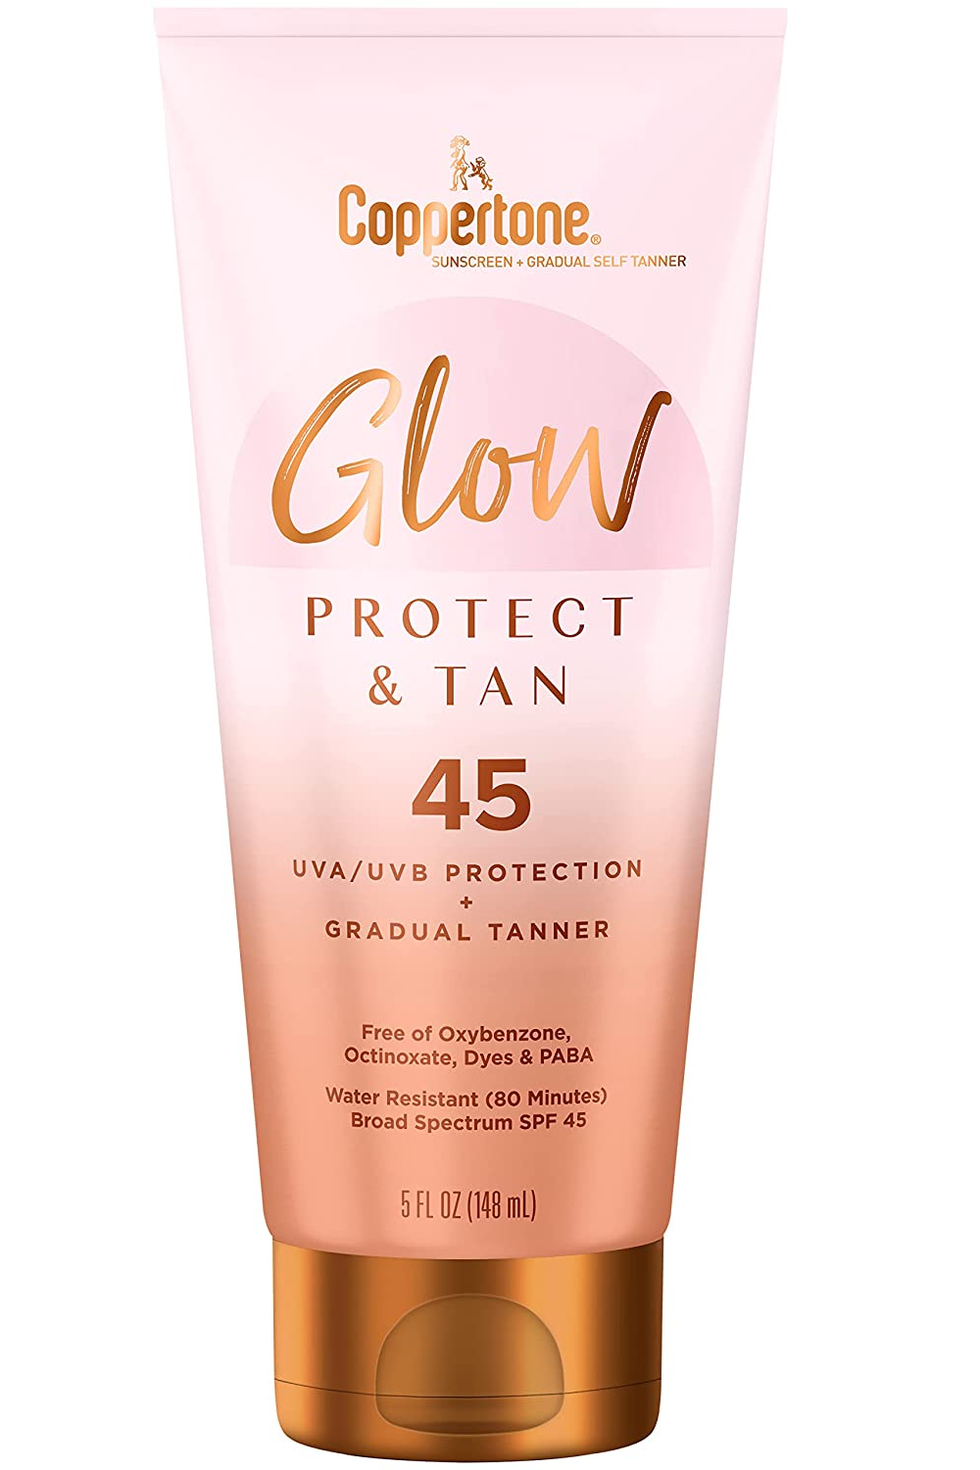 Glow Protect and Tan Sunscreen Lotion with Gradual Self Tanner SPF 45